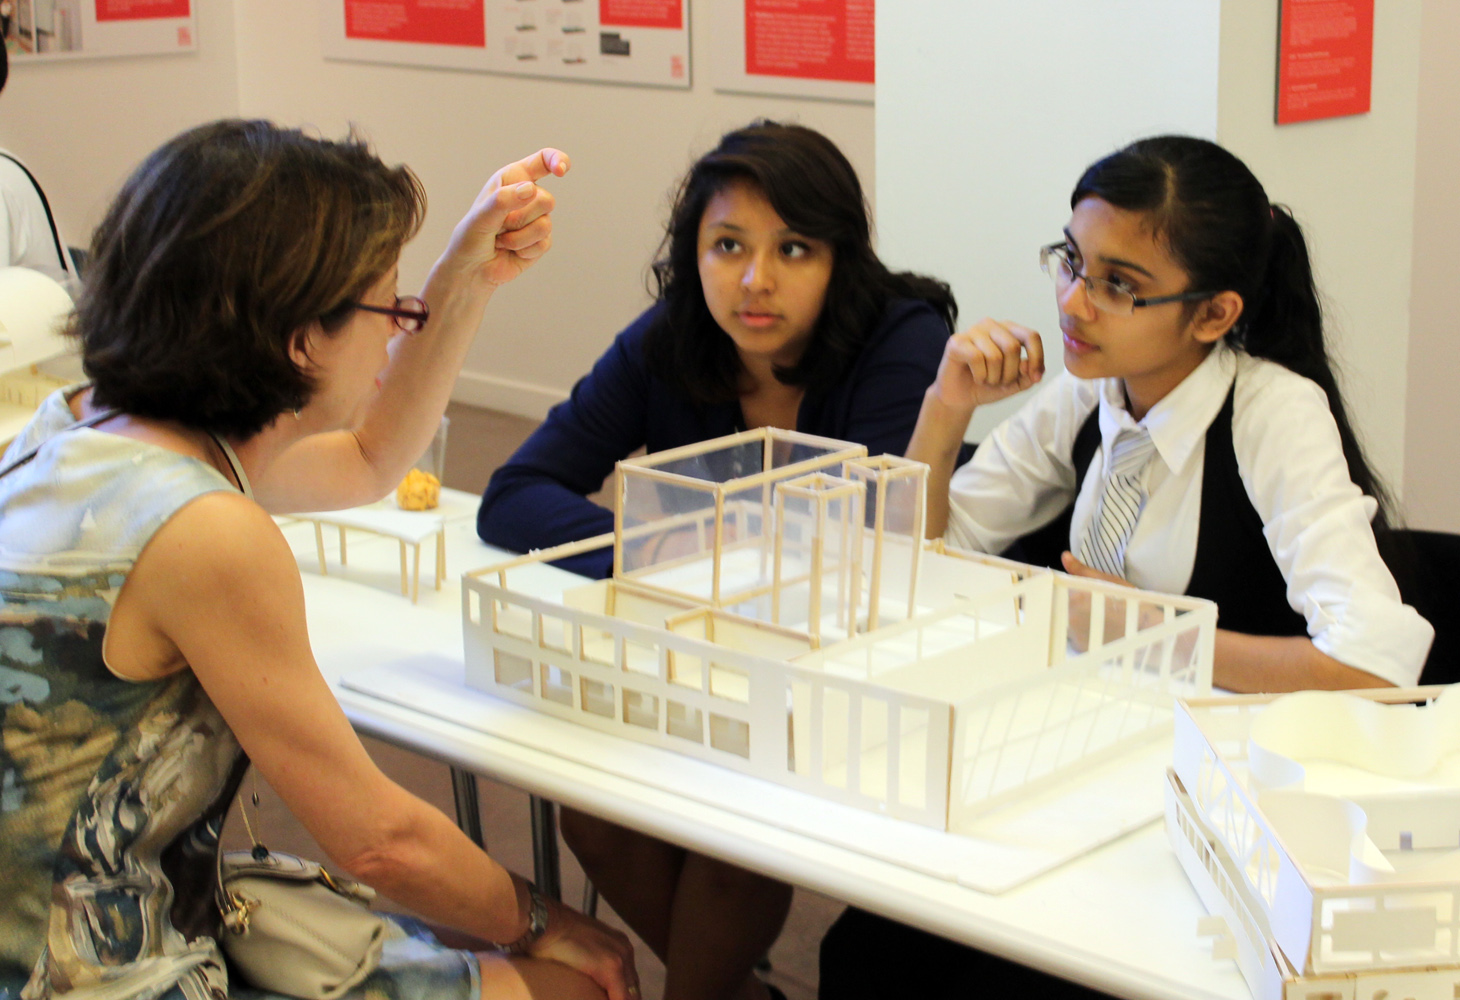 Learning by Design teams up with Urban Assembly School of Design and Construction